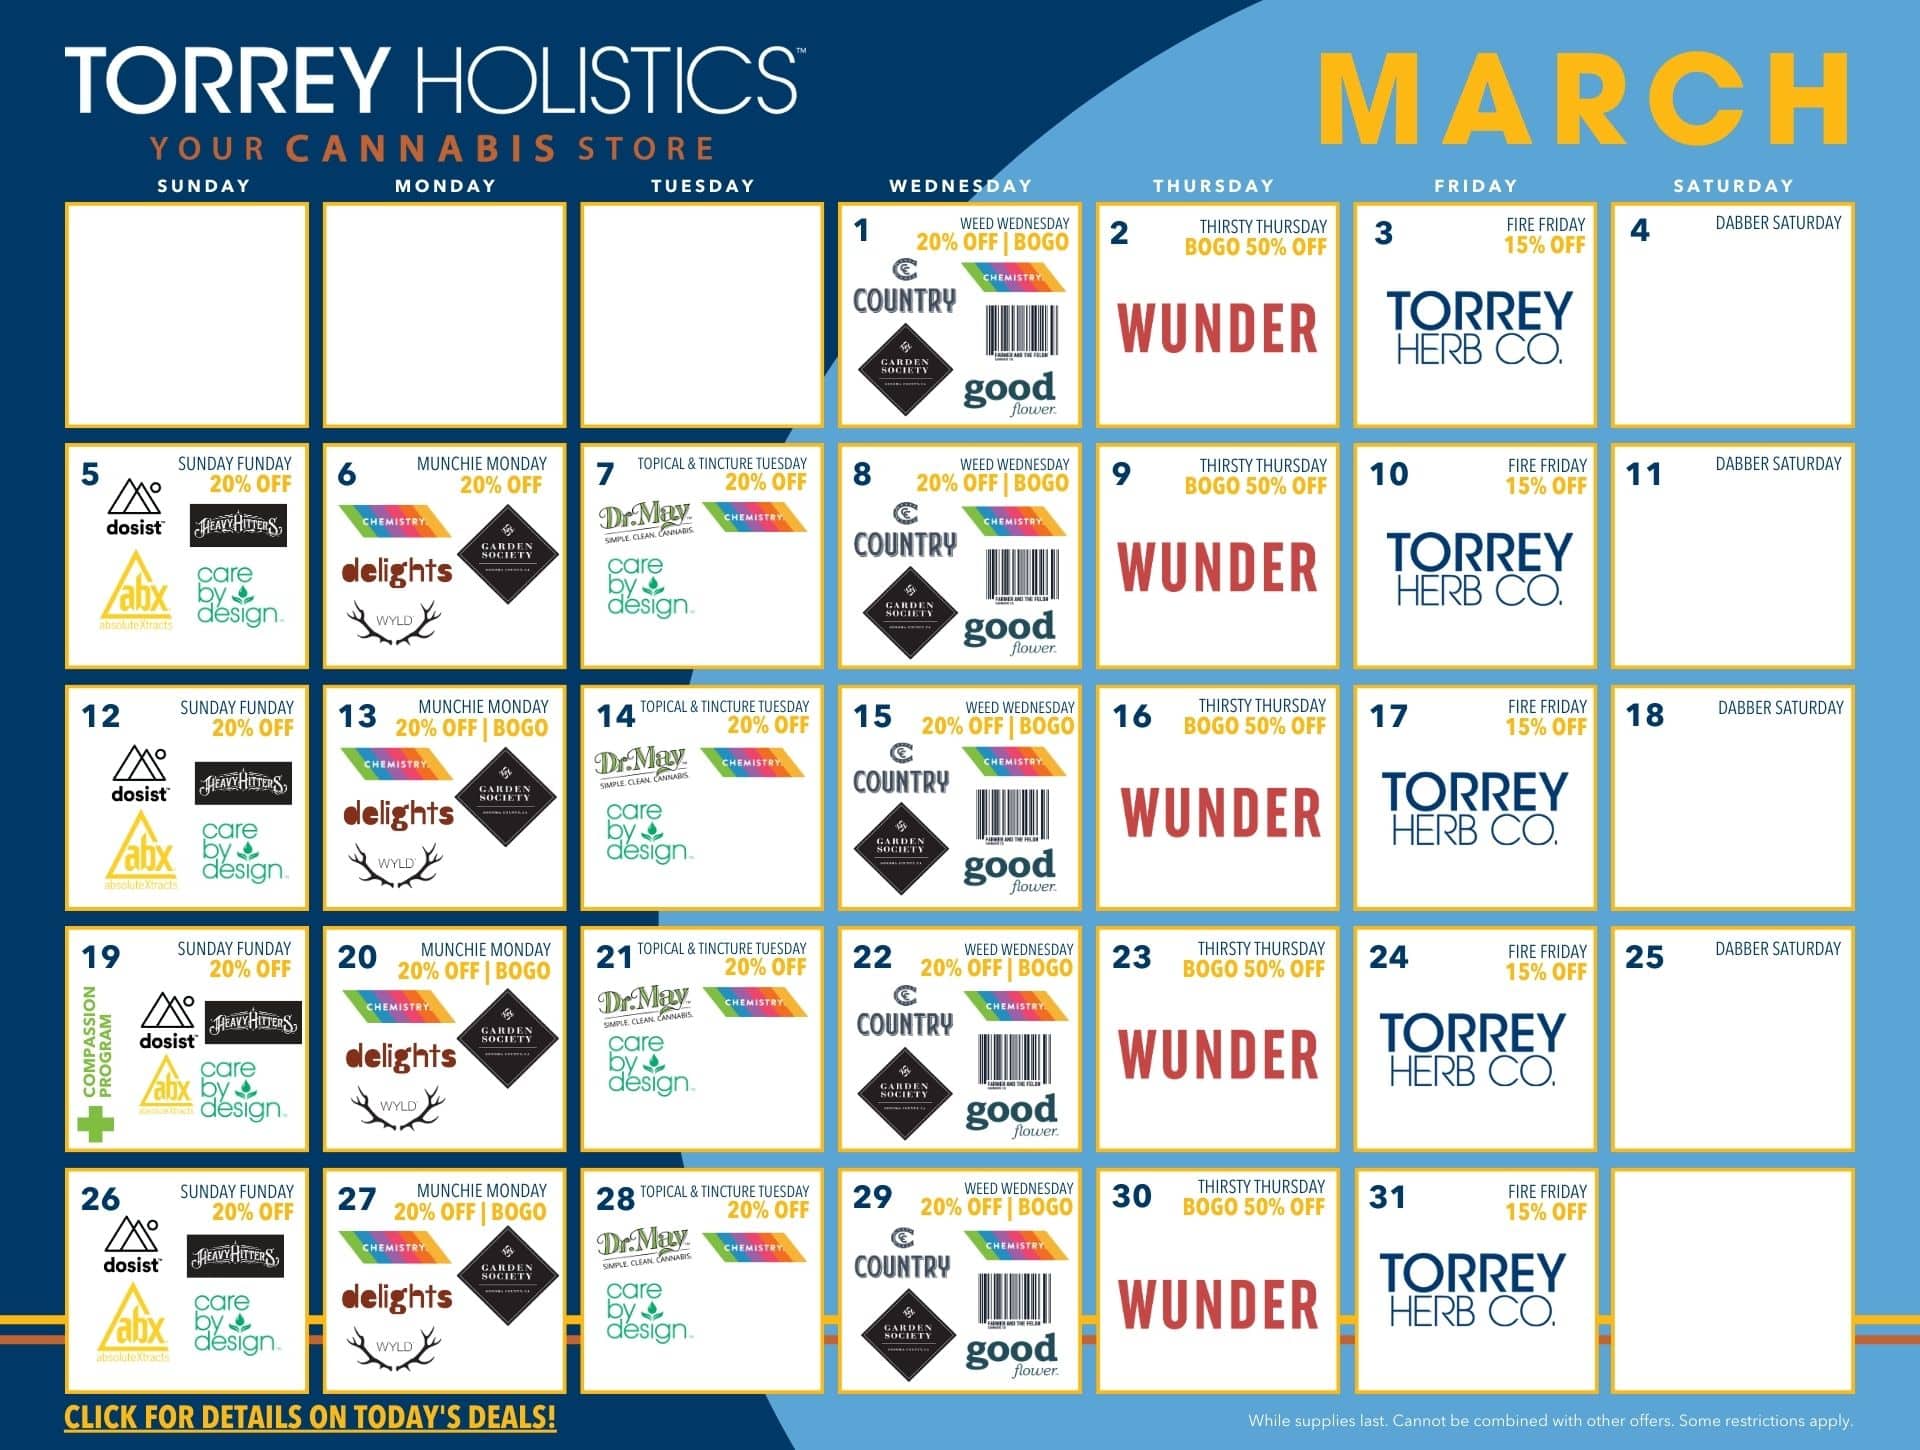 March Promo Calendar Click Here for Daily Deals